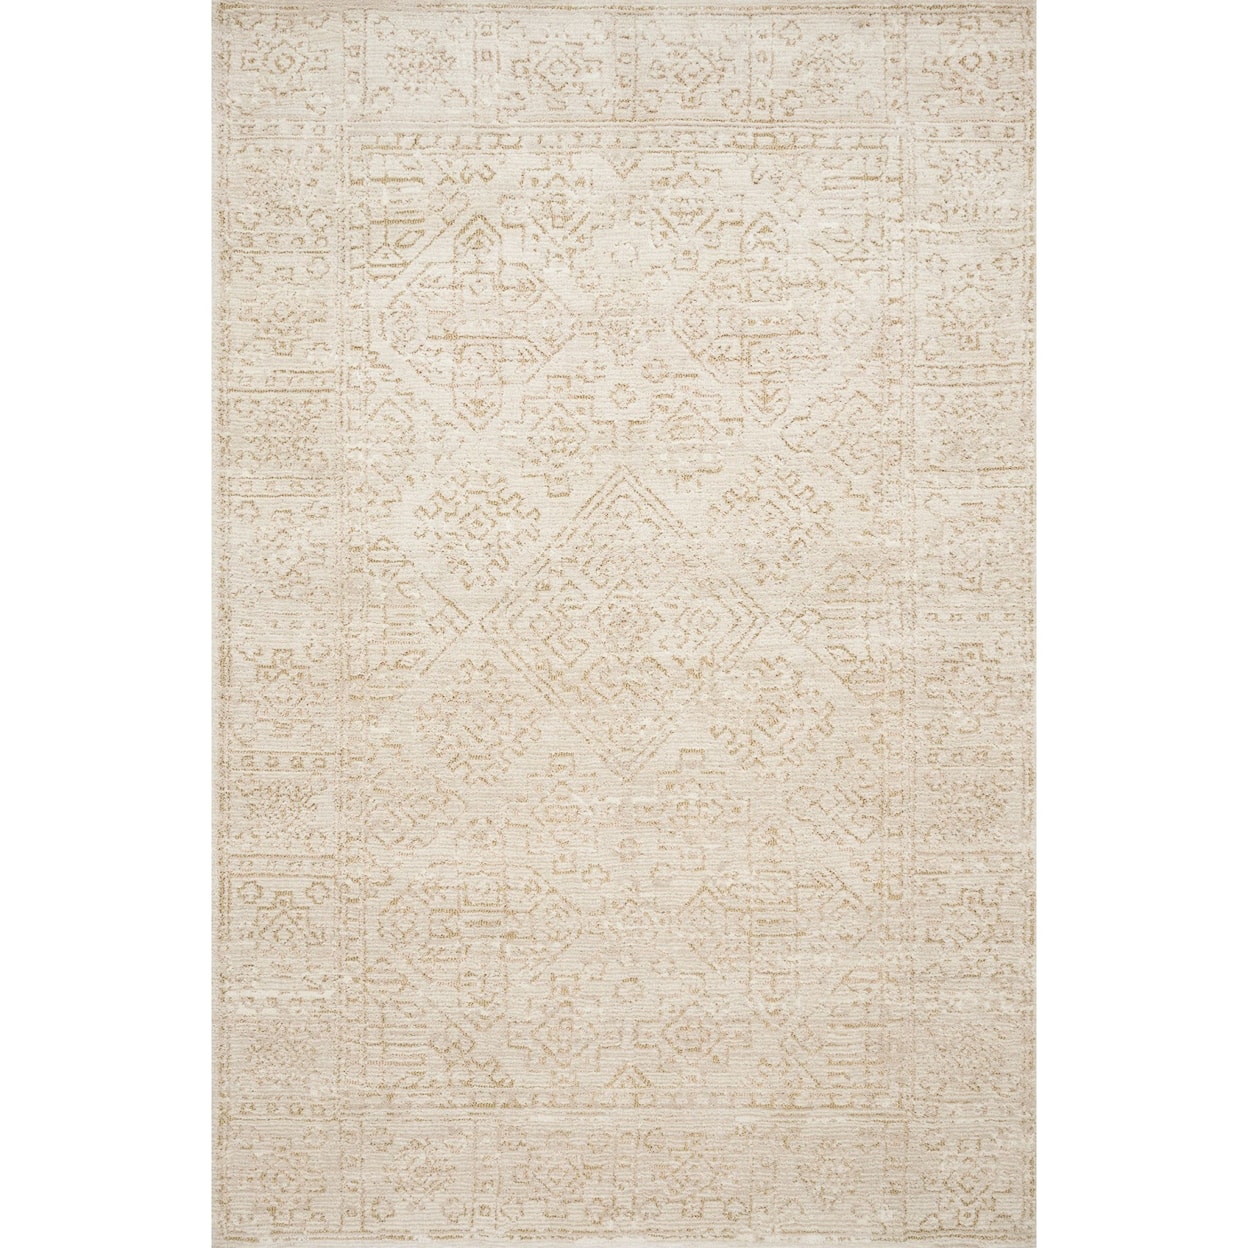 Magnolia Home by Joanna Gaines for Loloi Lotus 7'-9" x 9'-9" Rug